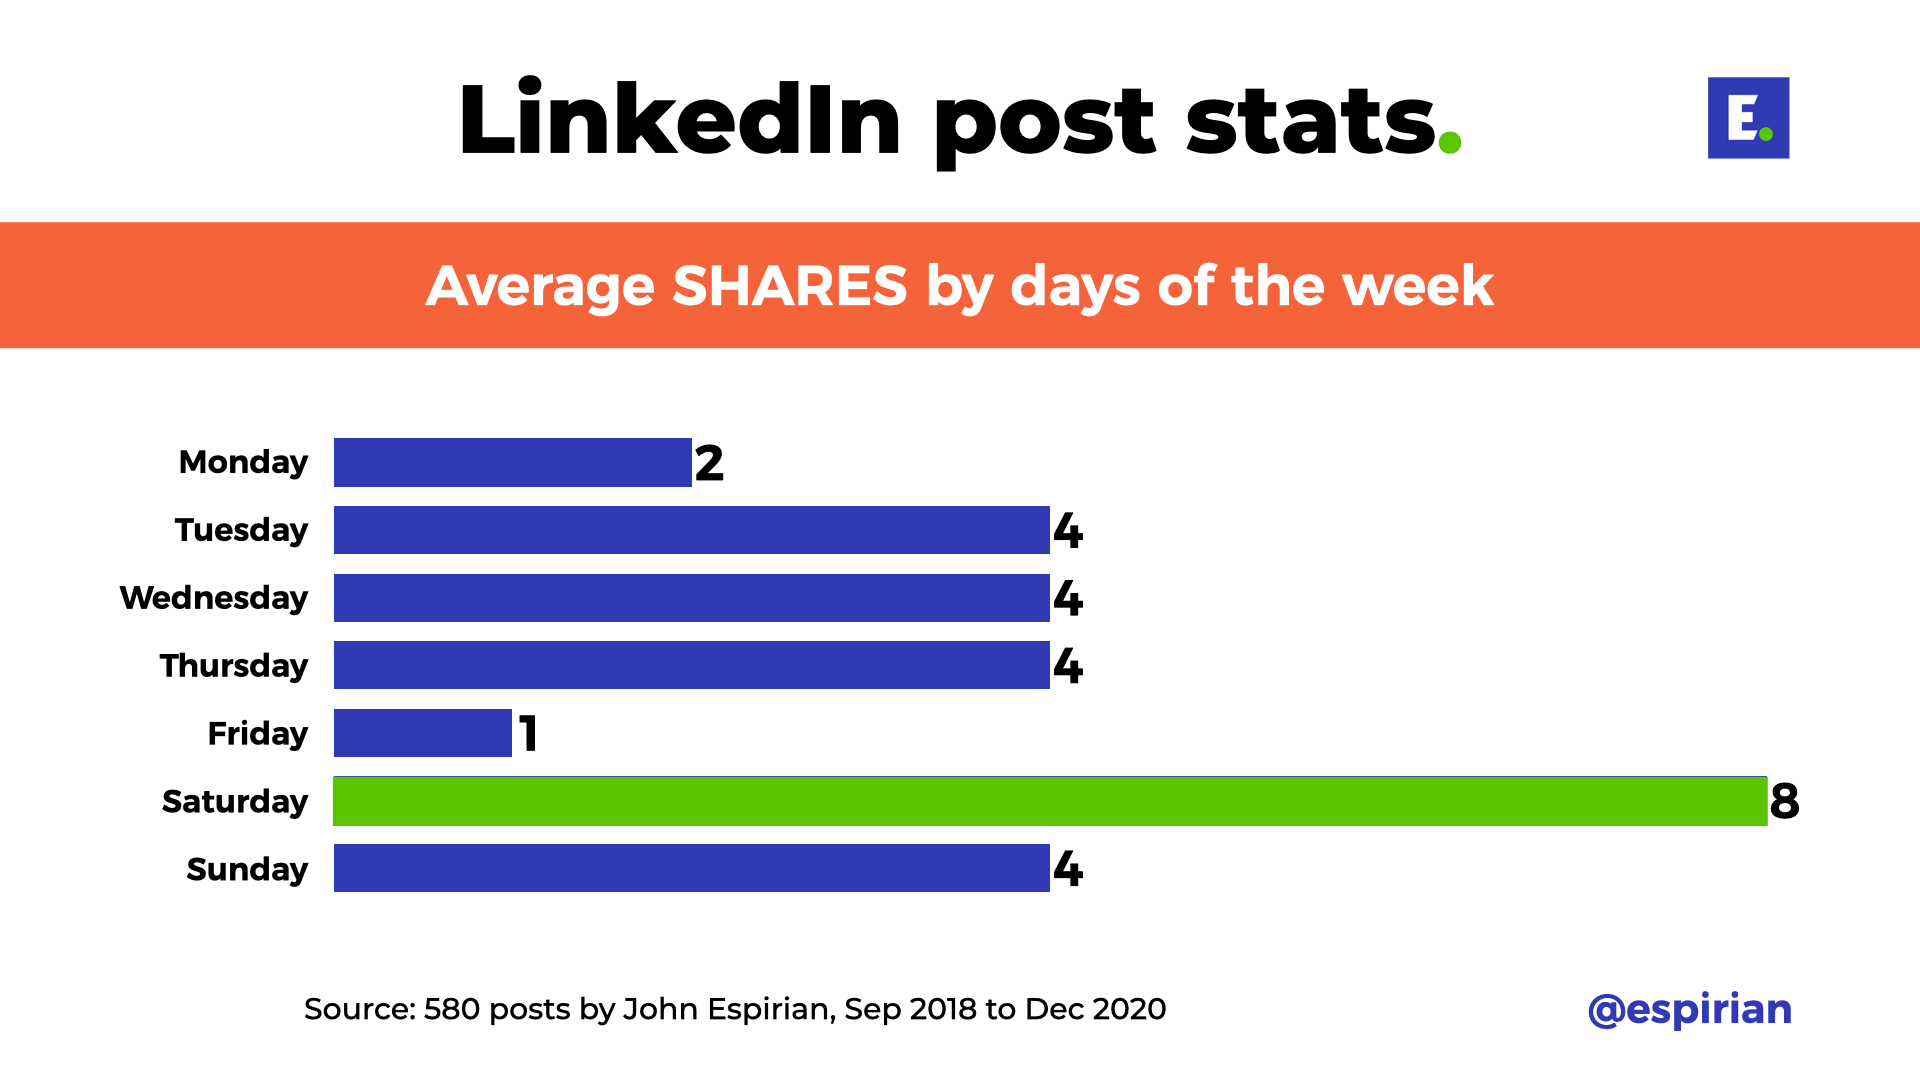 Average post shares by days of the week